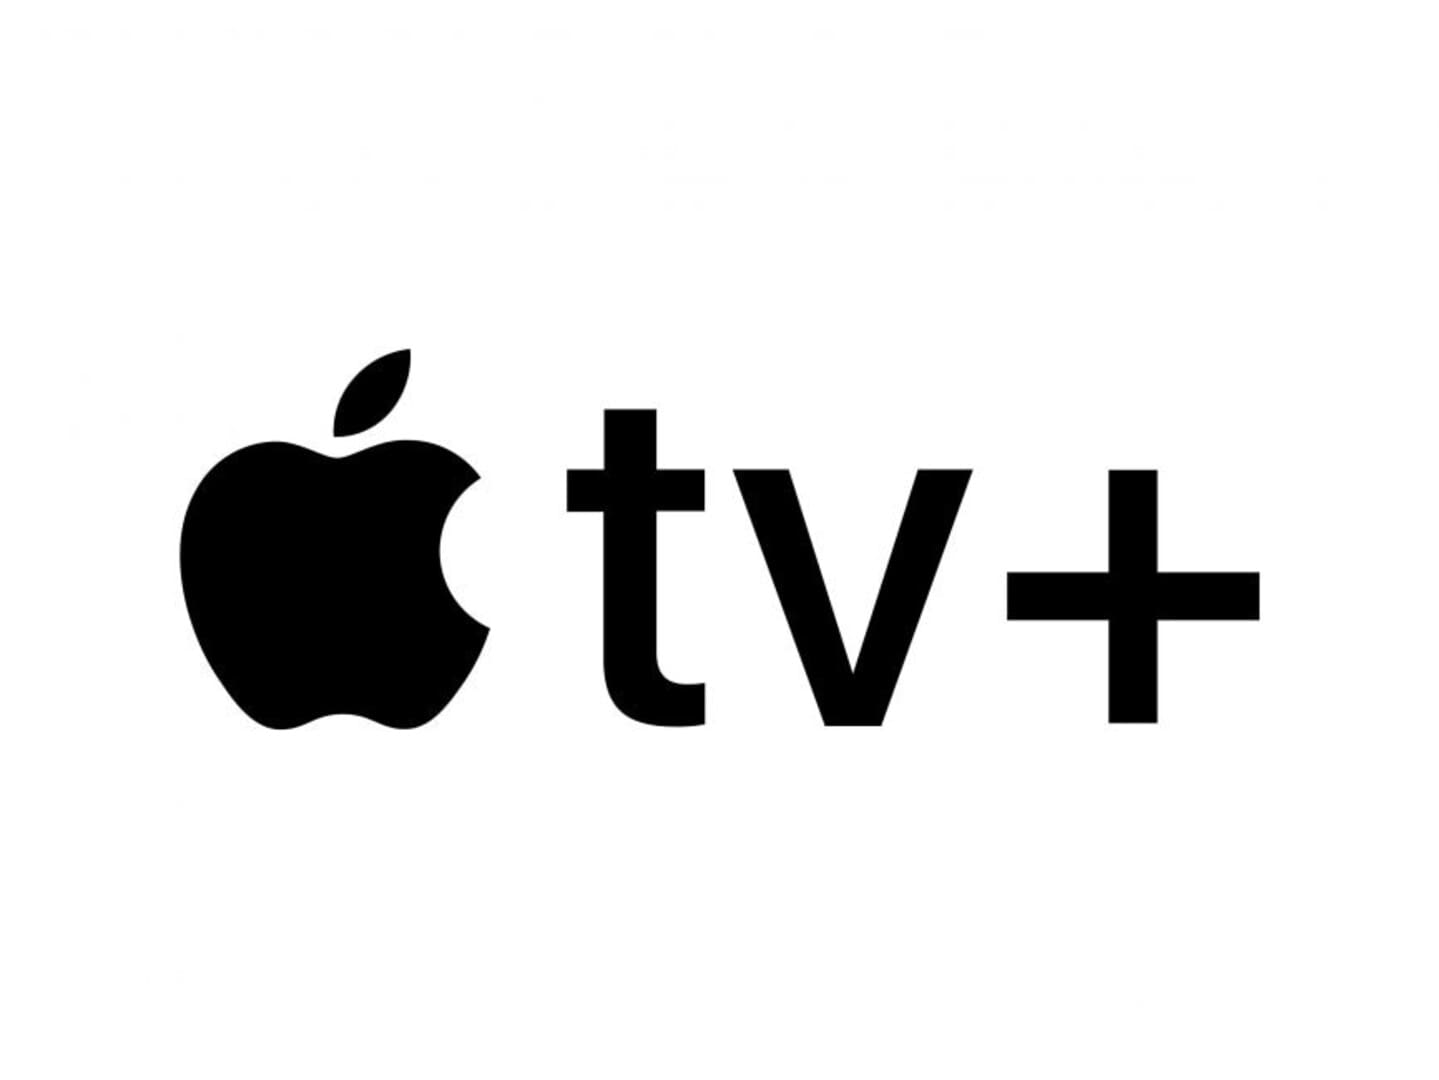 Co to jest Apple TV+?